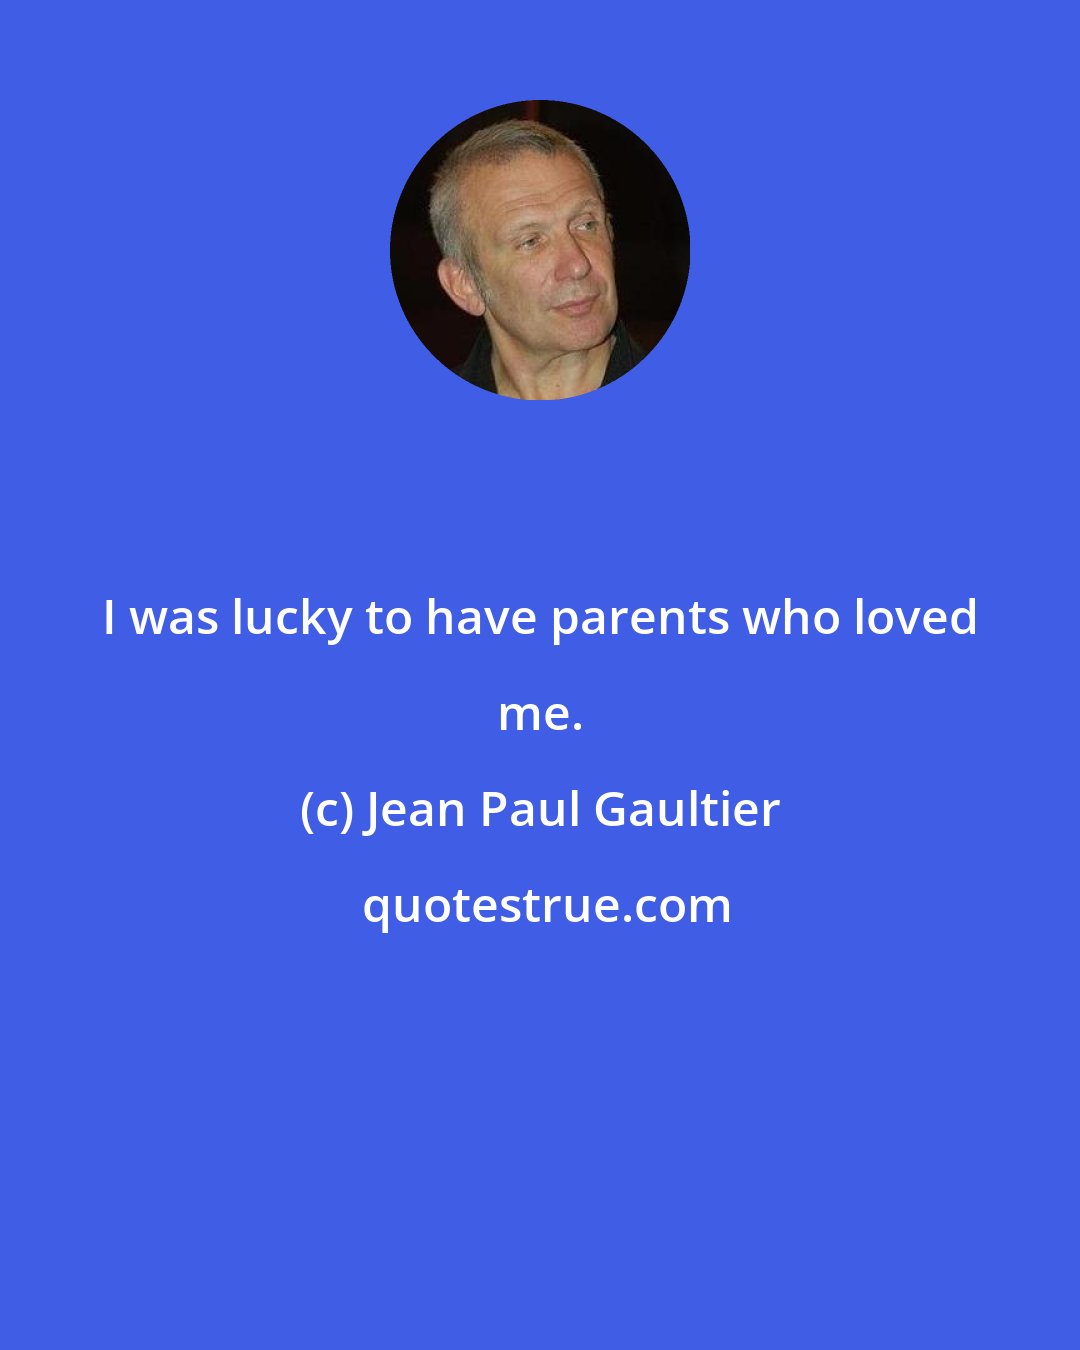 Jean Paul Gaultier: I was lucky to have parents who loved me.